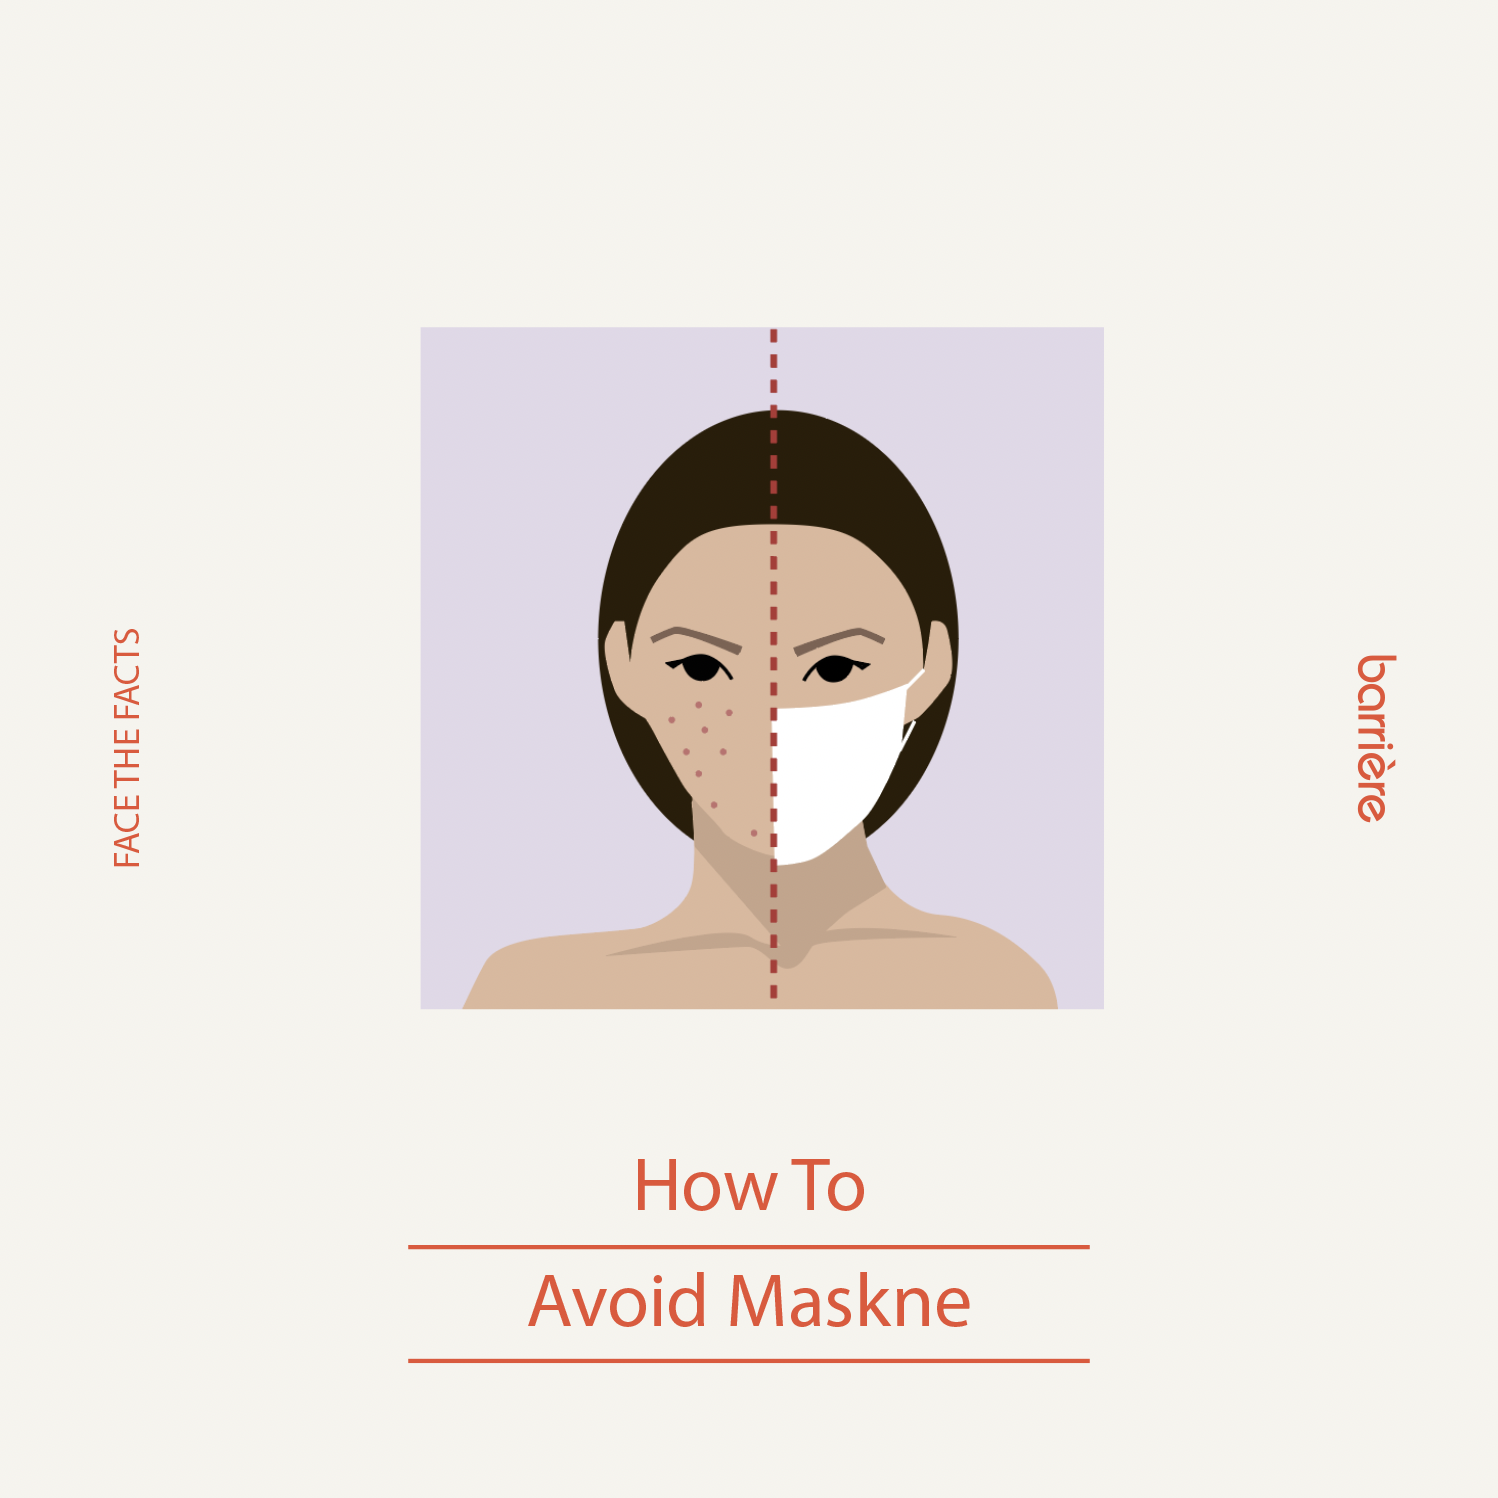 How to avoid Maskne according to Top dermatologist Diane S. Berson